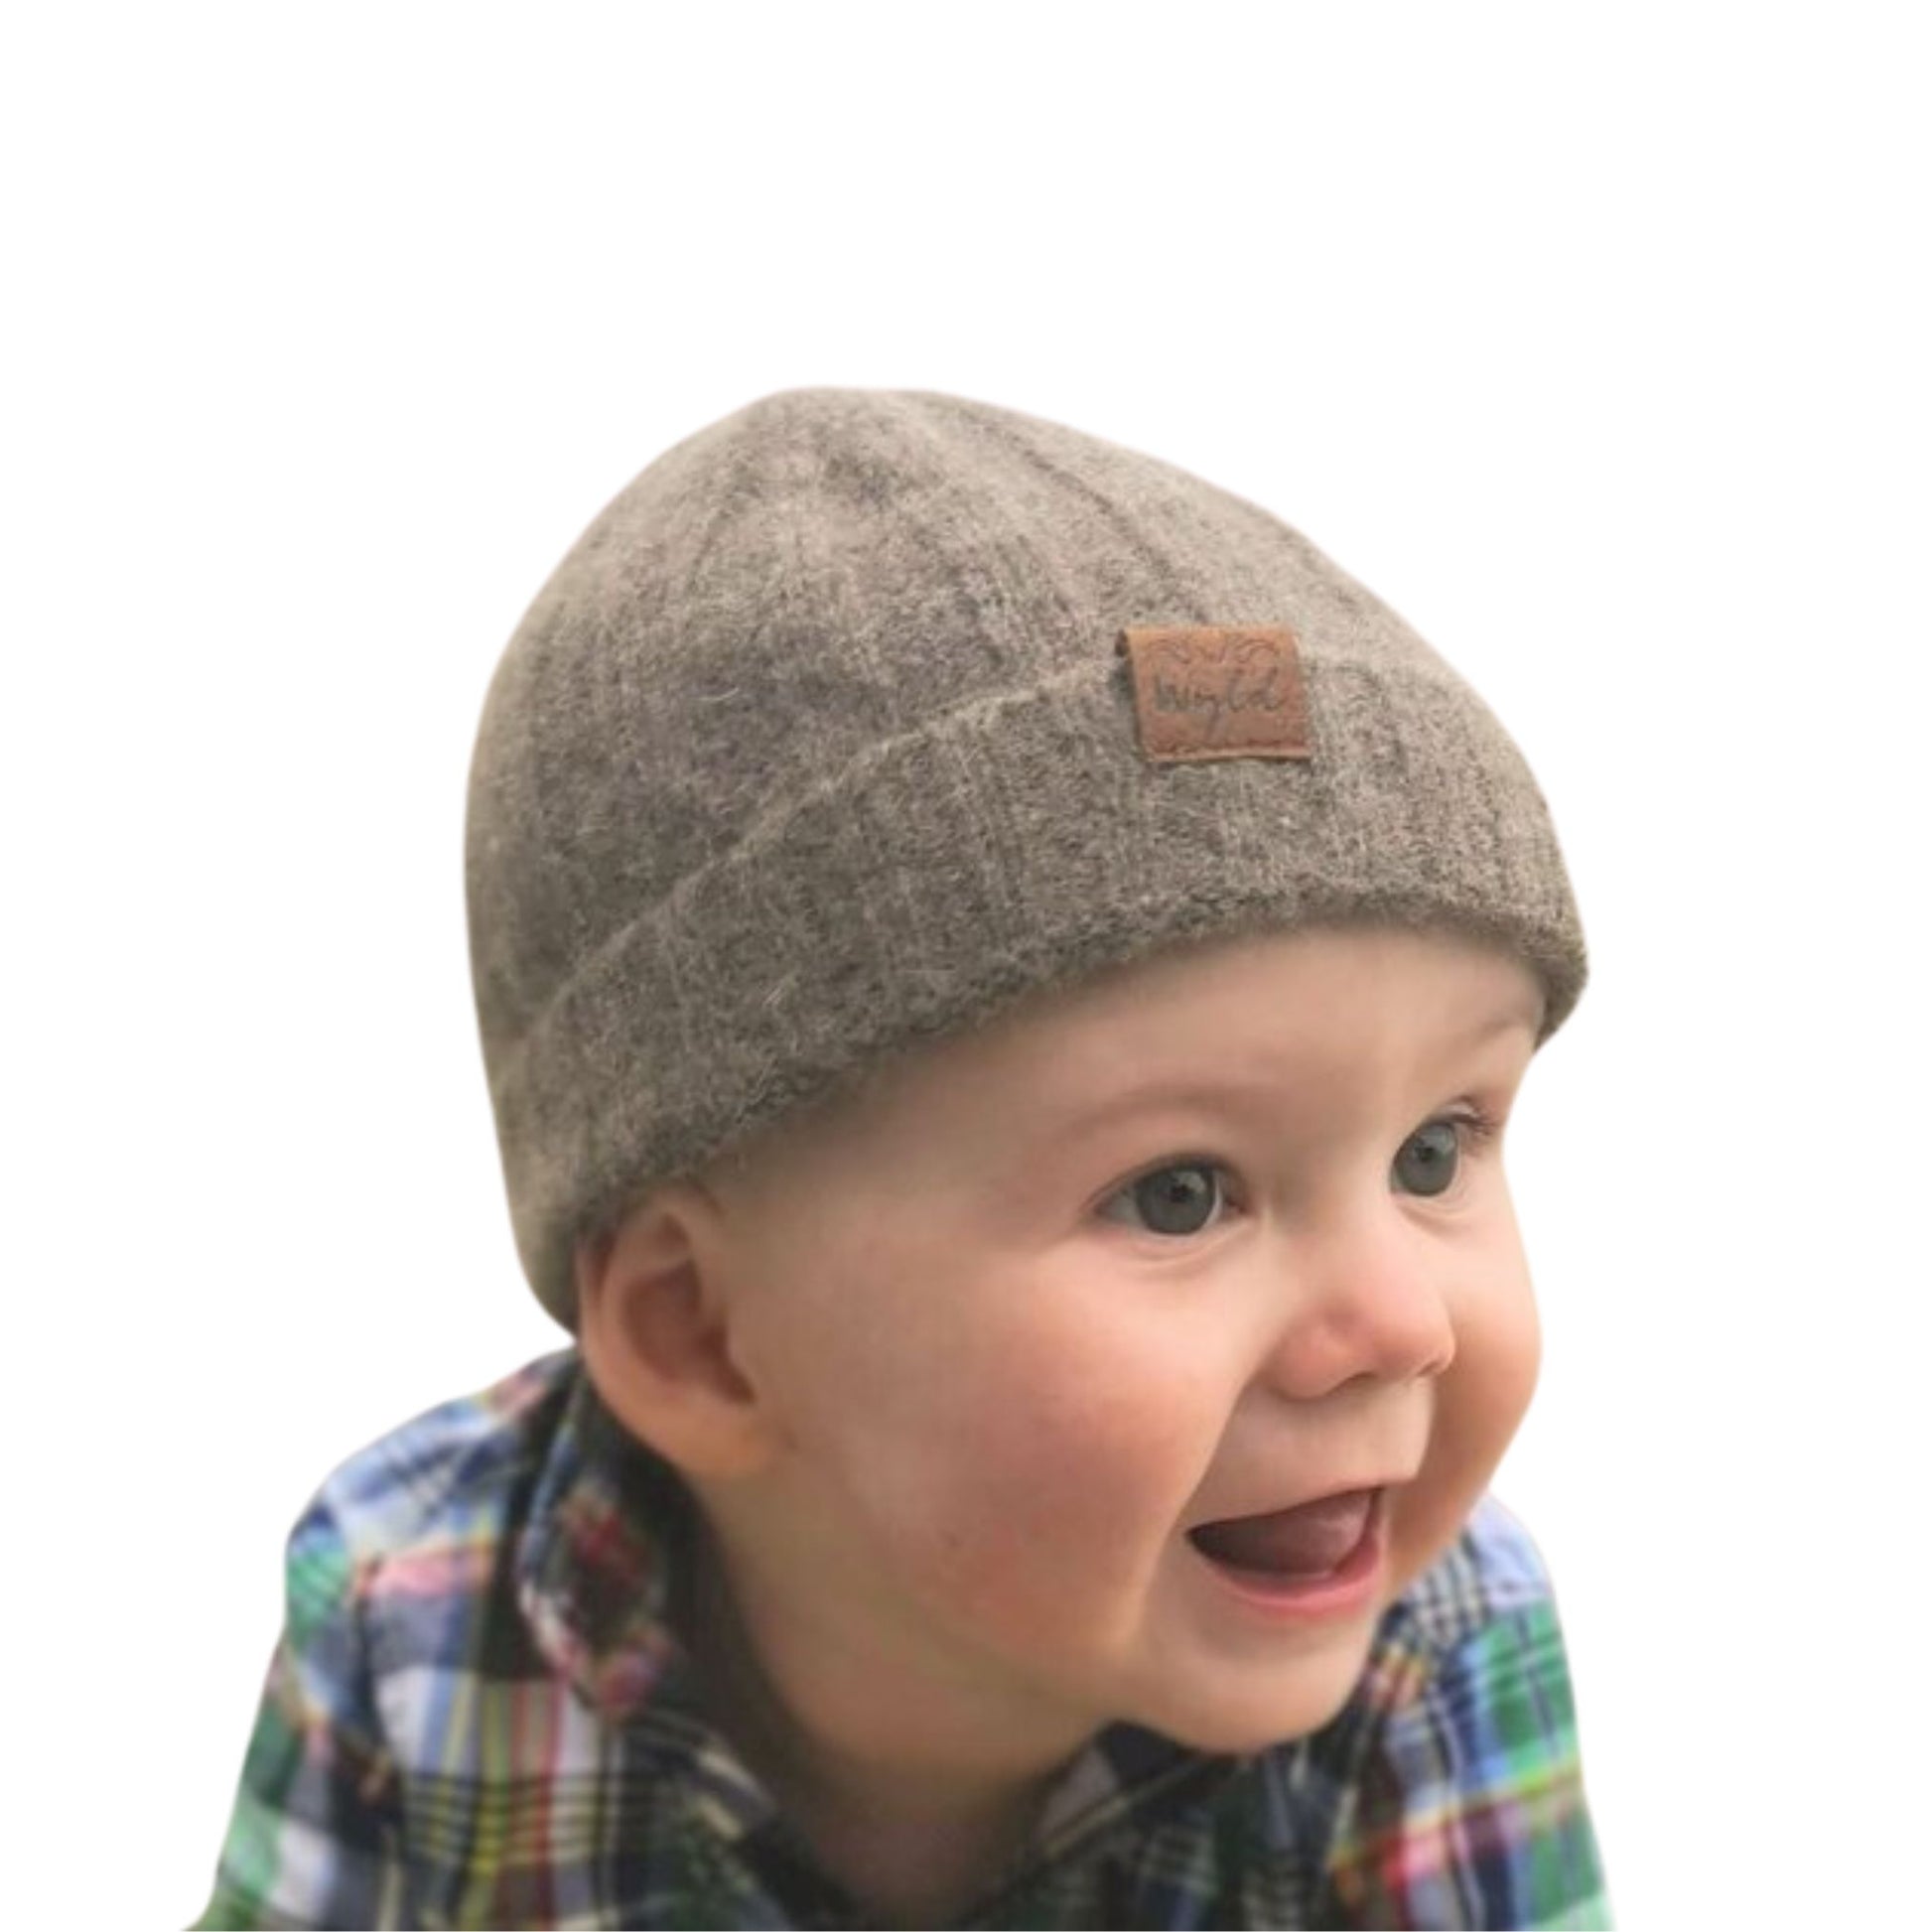 Baby wearing a brown knit beanie from Wyld.